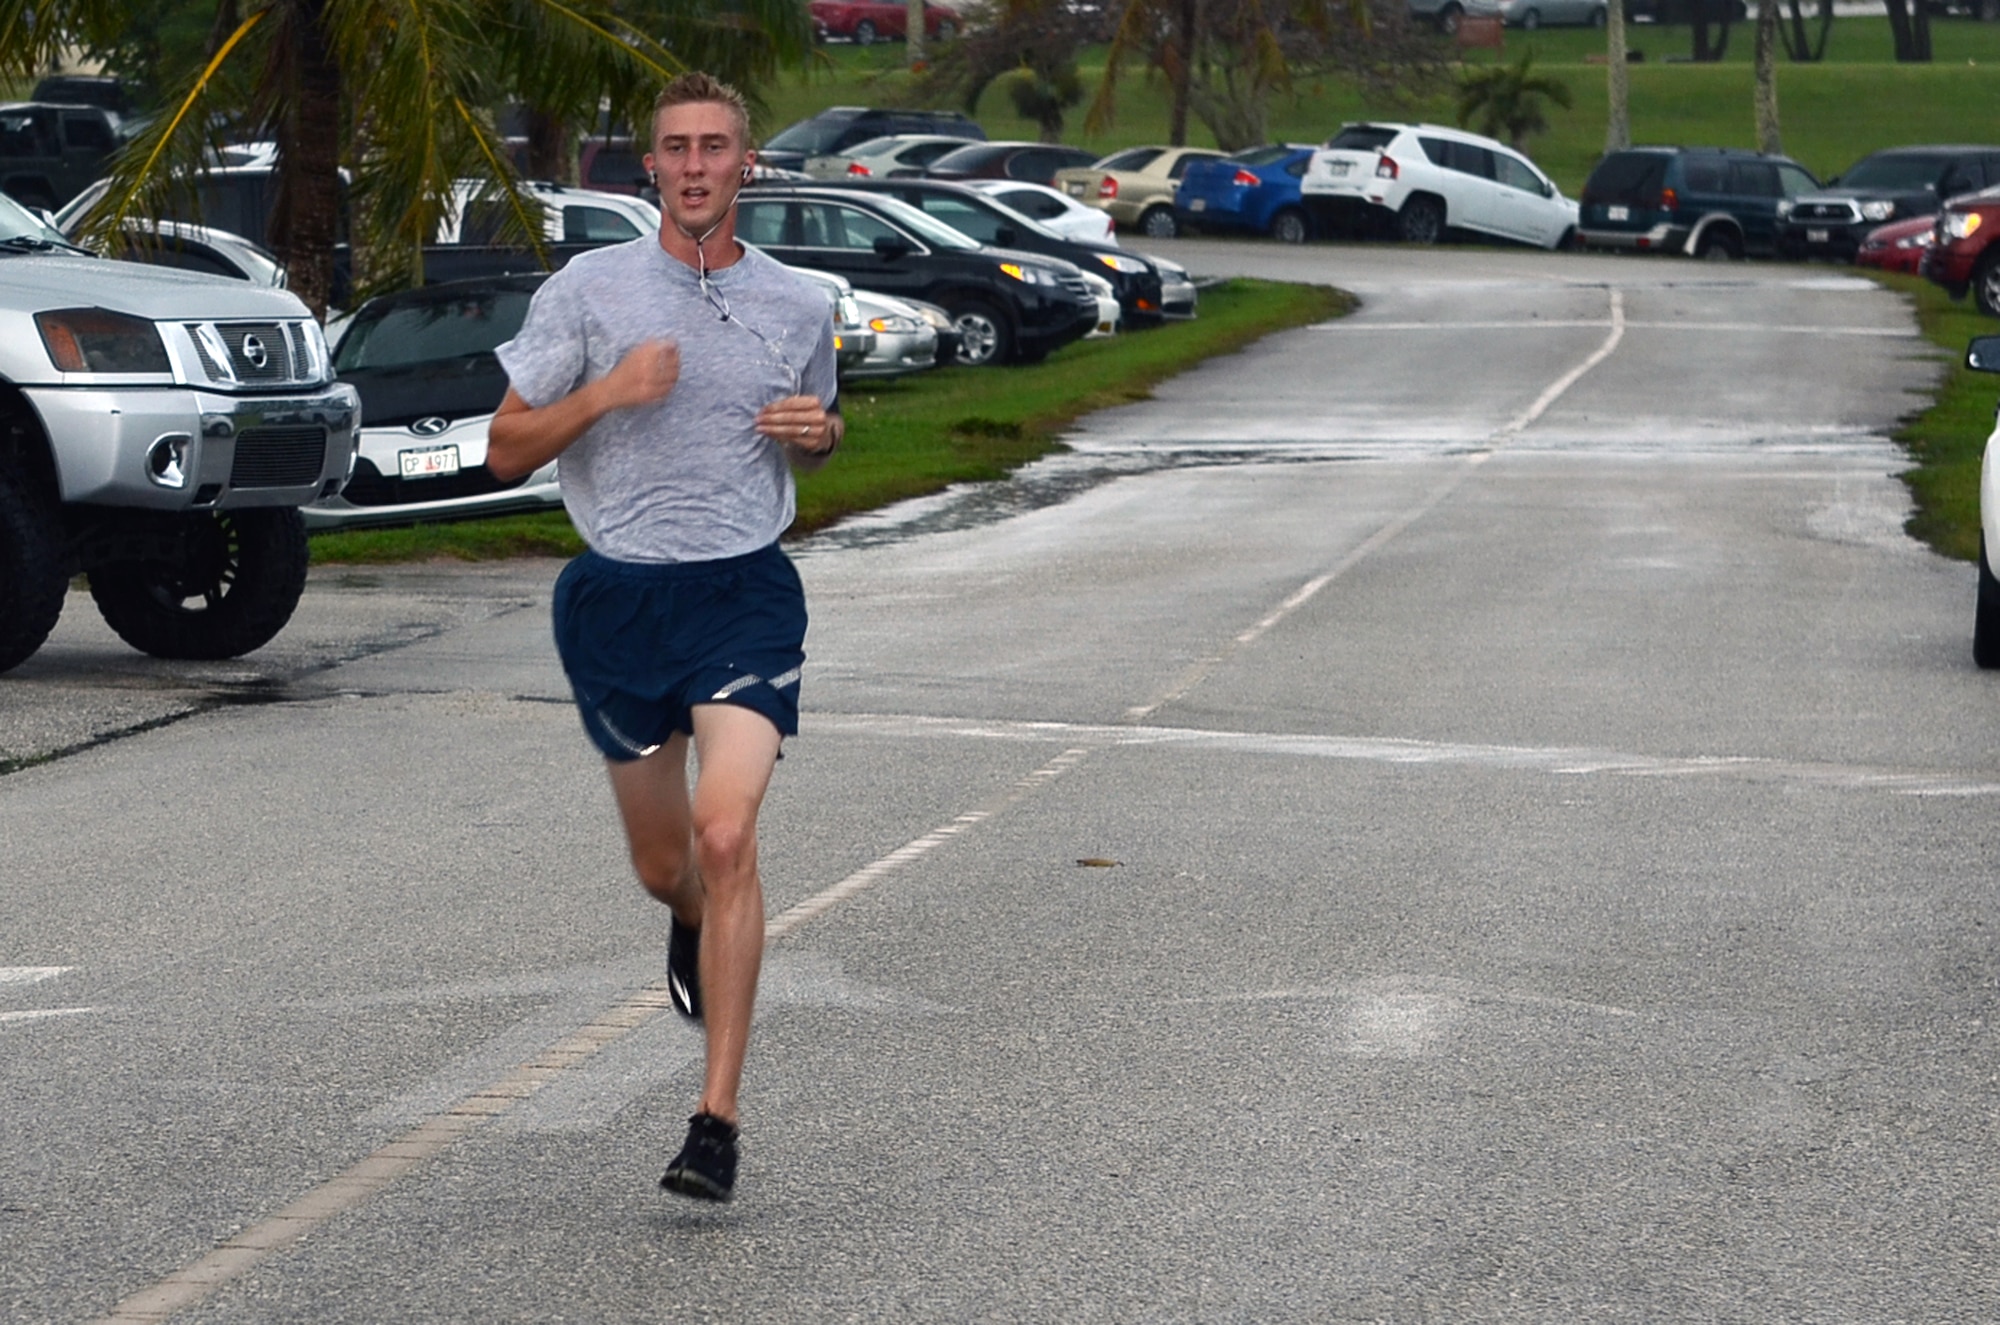 Jacob Johnson, 36th Munitions Squadron, sprints to the finish line during the April Fool’s 5K at the Palm Tree Golf Course on Andersen Air Force Base, Guam, April 1, 2015. Johnson was the first runner to cross the finish line with a time of 18:51. (U.S. Air Force photo by Airman 1st Class Alexa Ann Henderson/Released)